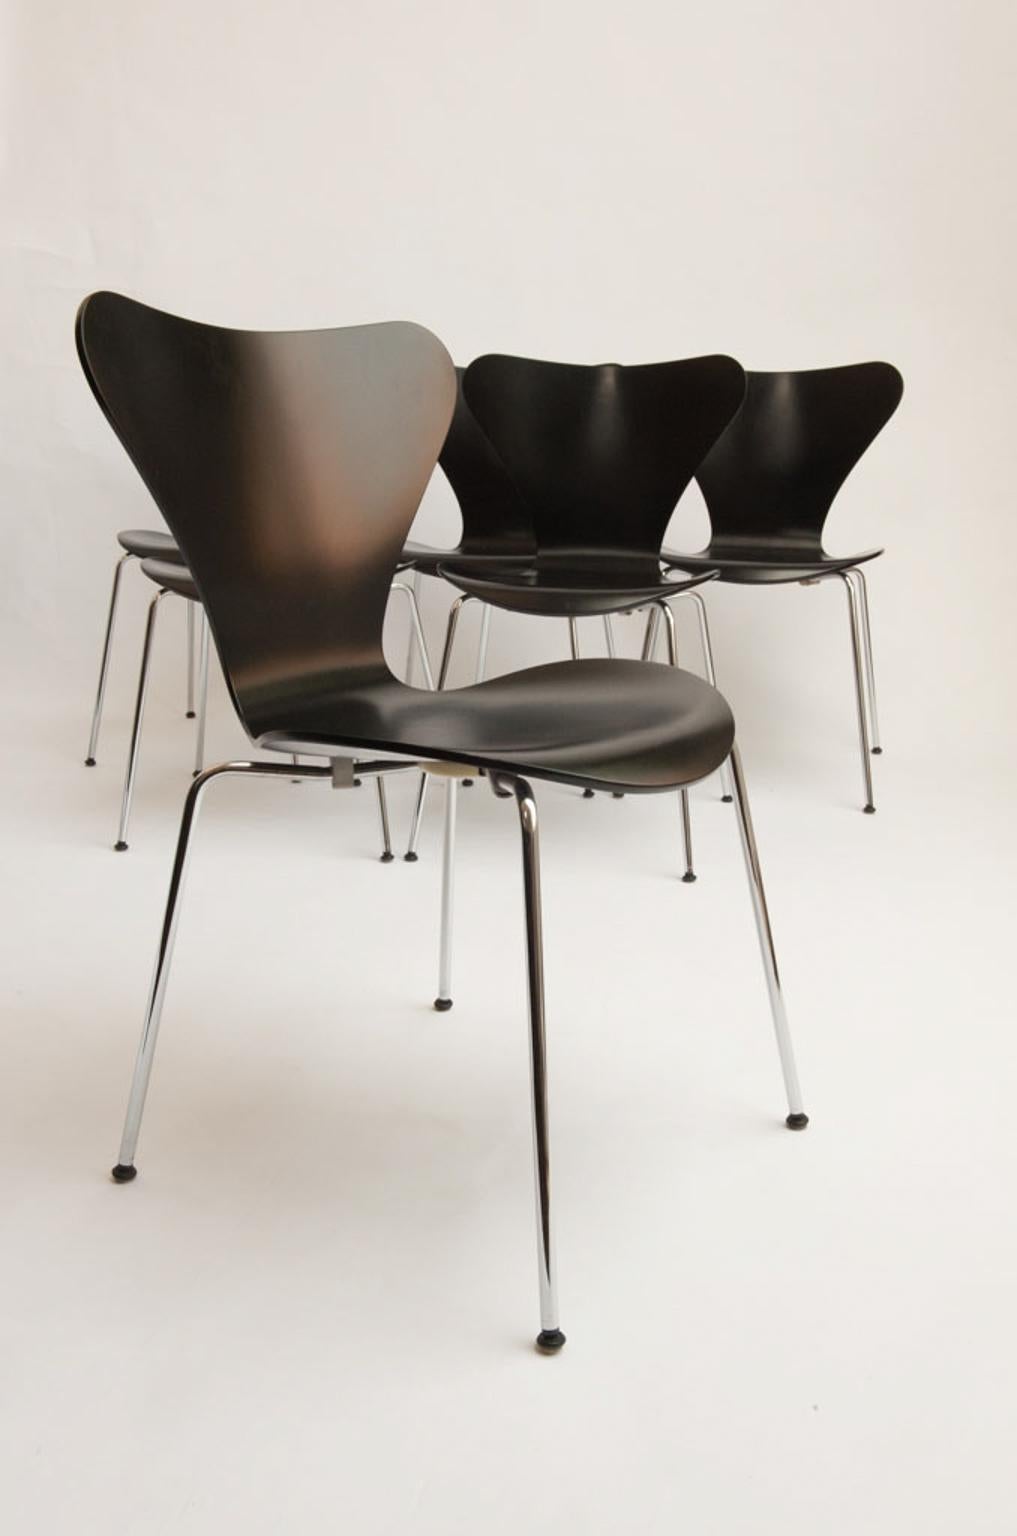 Seven chair, model 3107. Set of six dining chairs with chromium-plated metal frames with black-lacquered laminated wood shells. Designed by Arne Jacobsen in 1955 and manufactured by Fritz Hansen.
Literature: Noritsugu Oda, Danish chairs, p. 64.